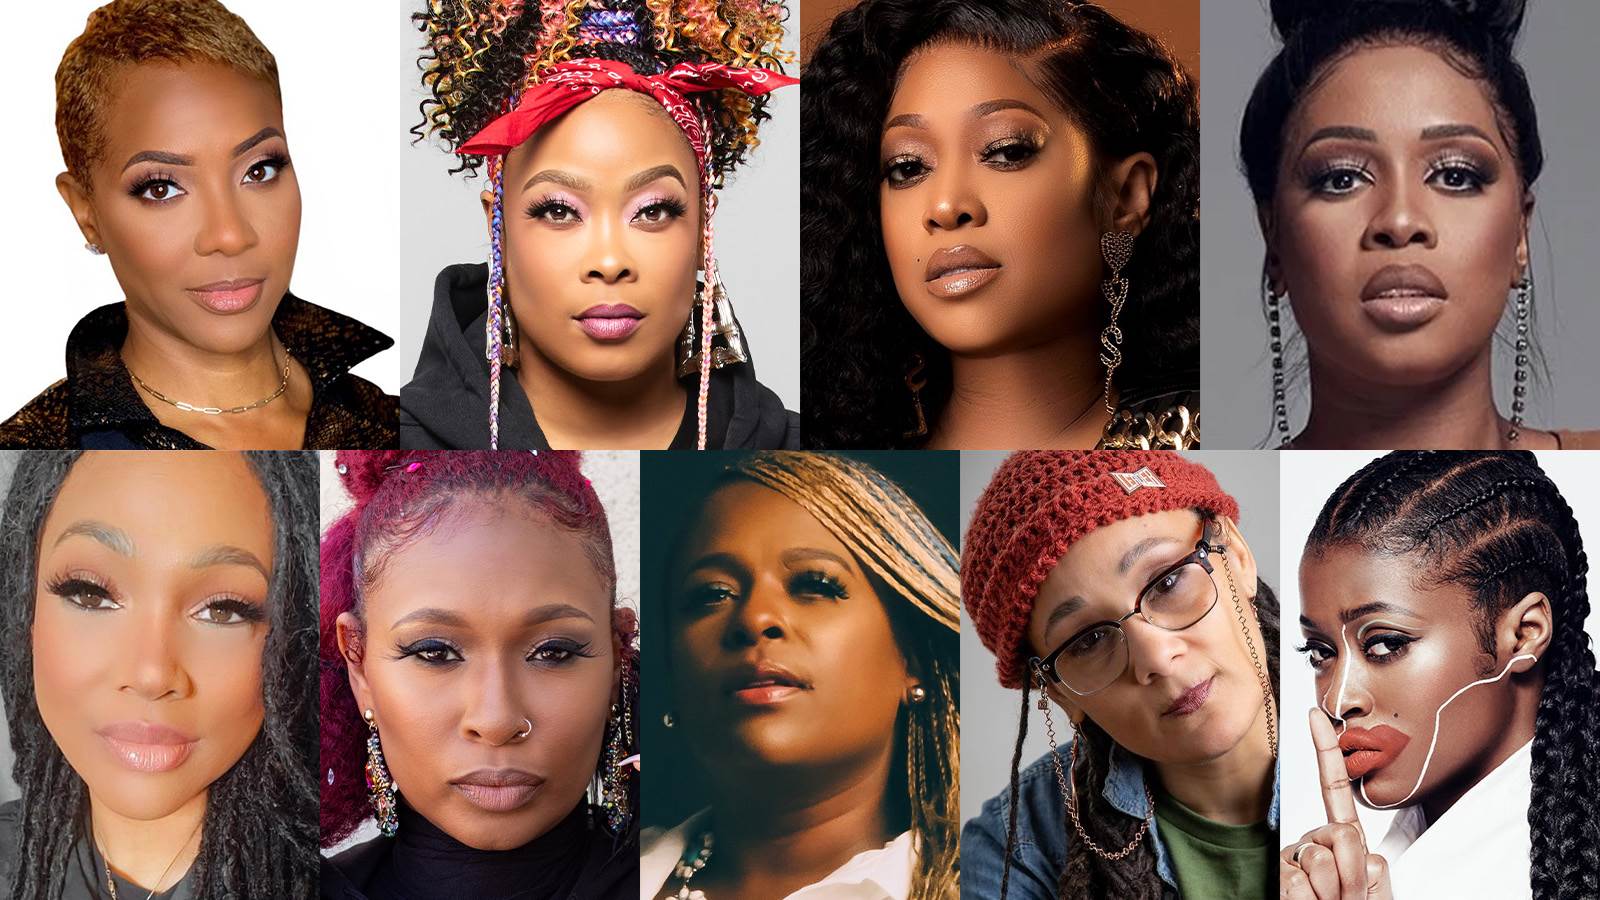 What About the Women in Hip Hop?